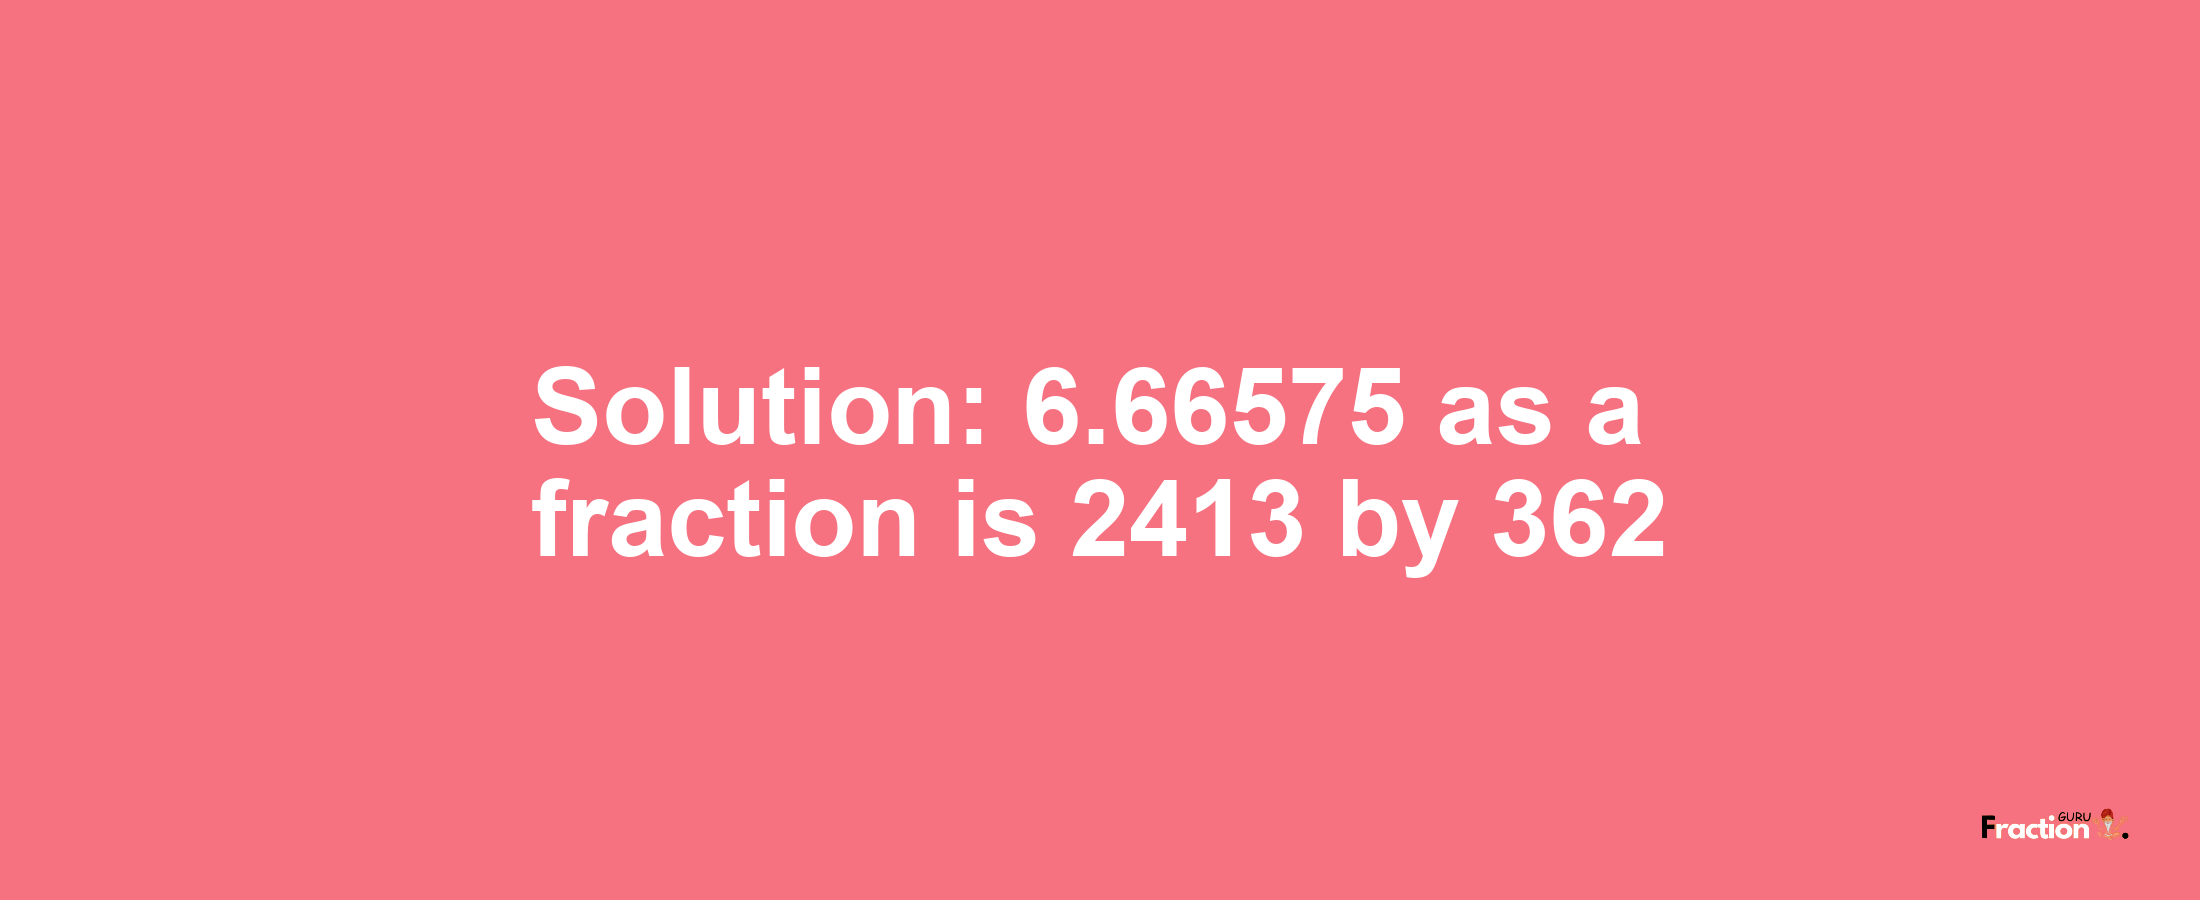 Solution:6.66575 as a fraction is 2413/362